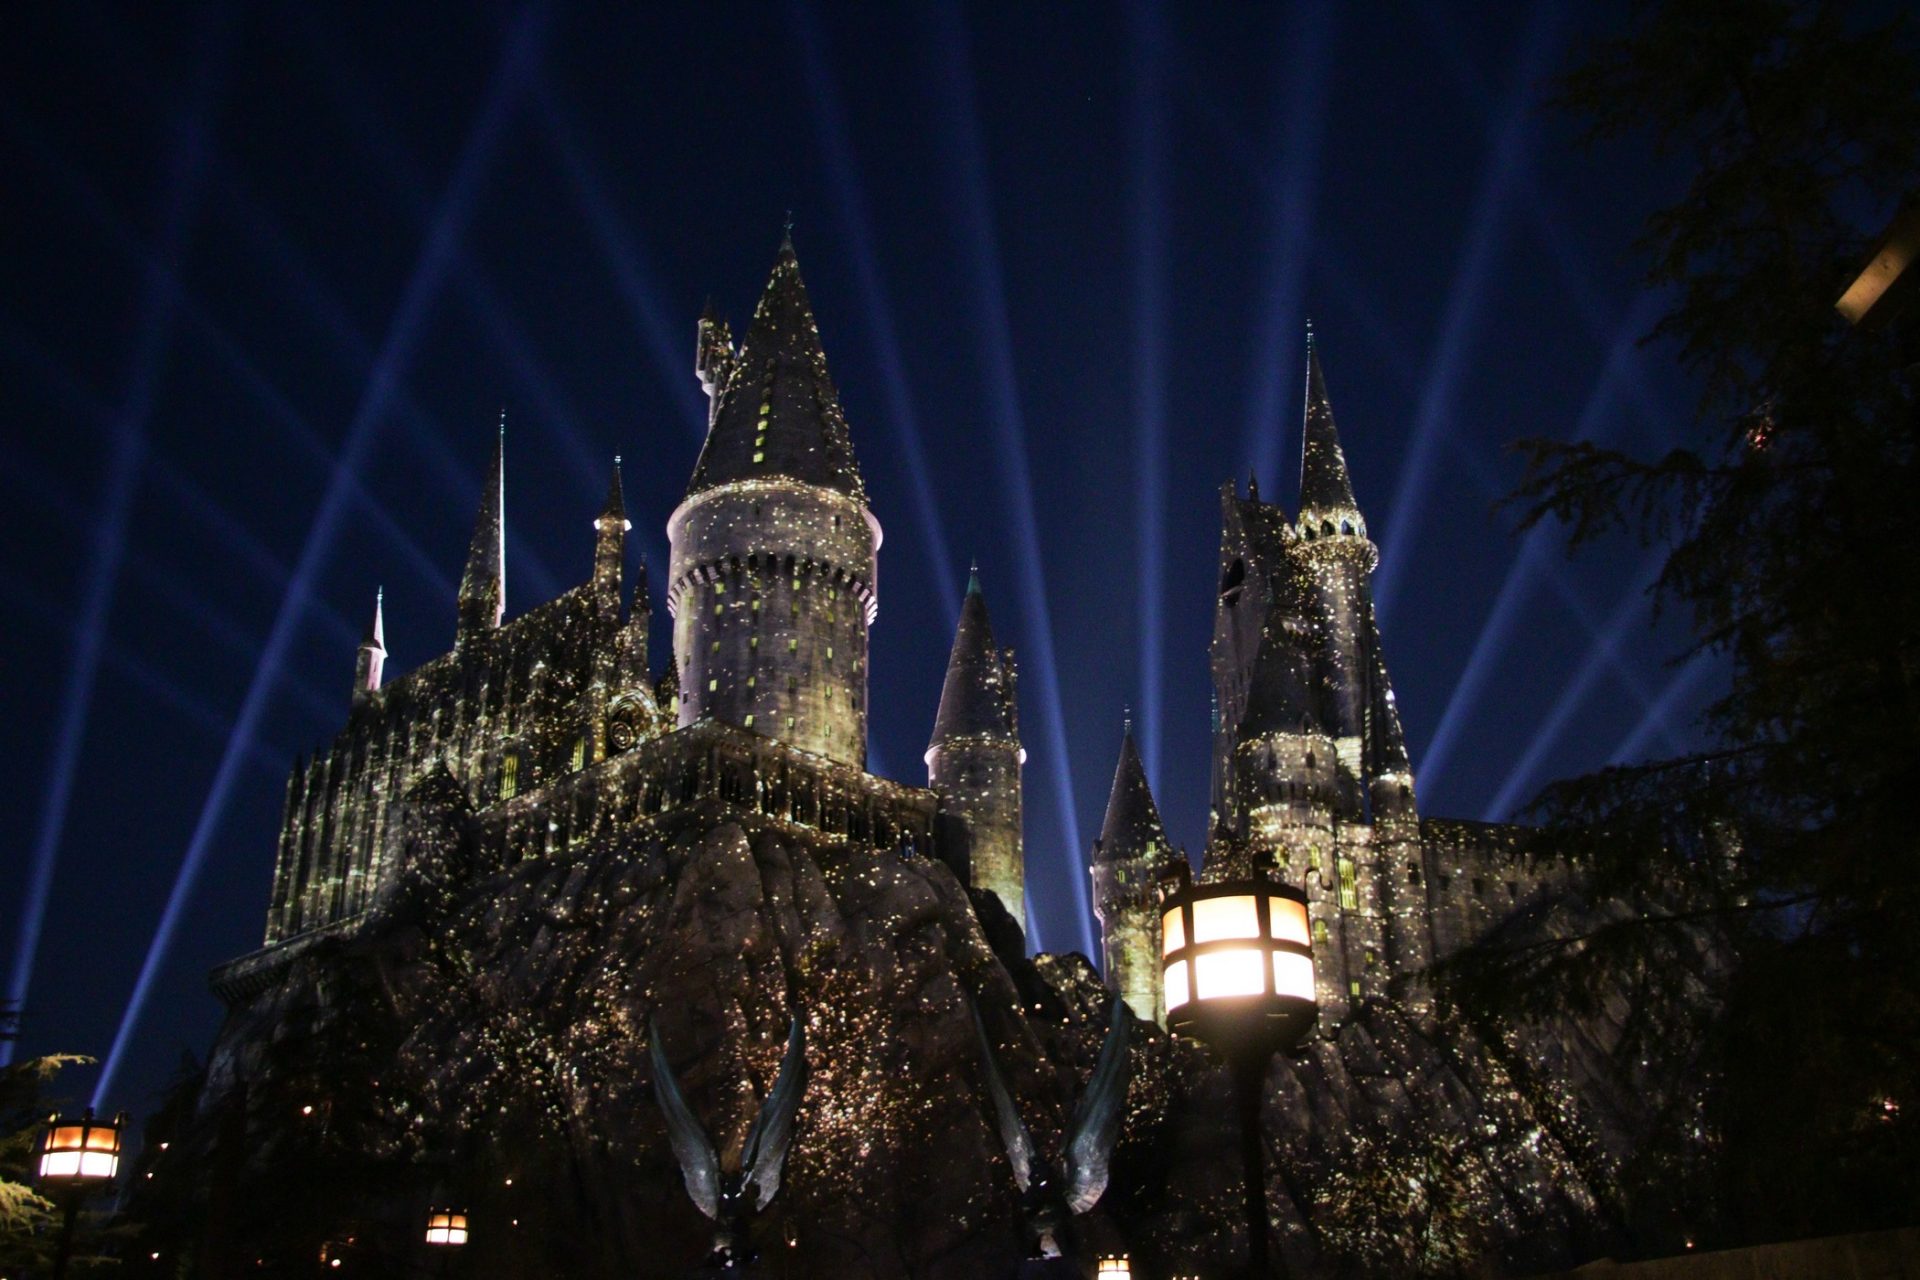 The Nighttime Lights at Hogwarts Castle returns for the Summer to